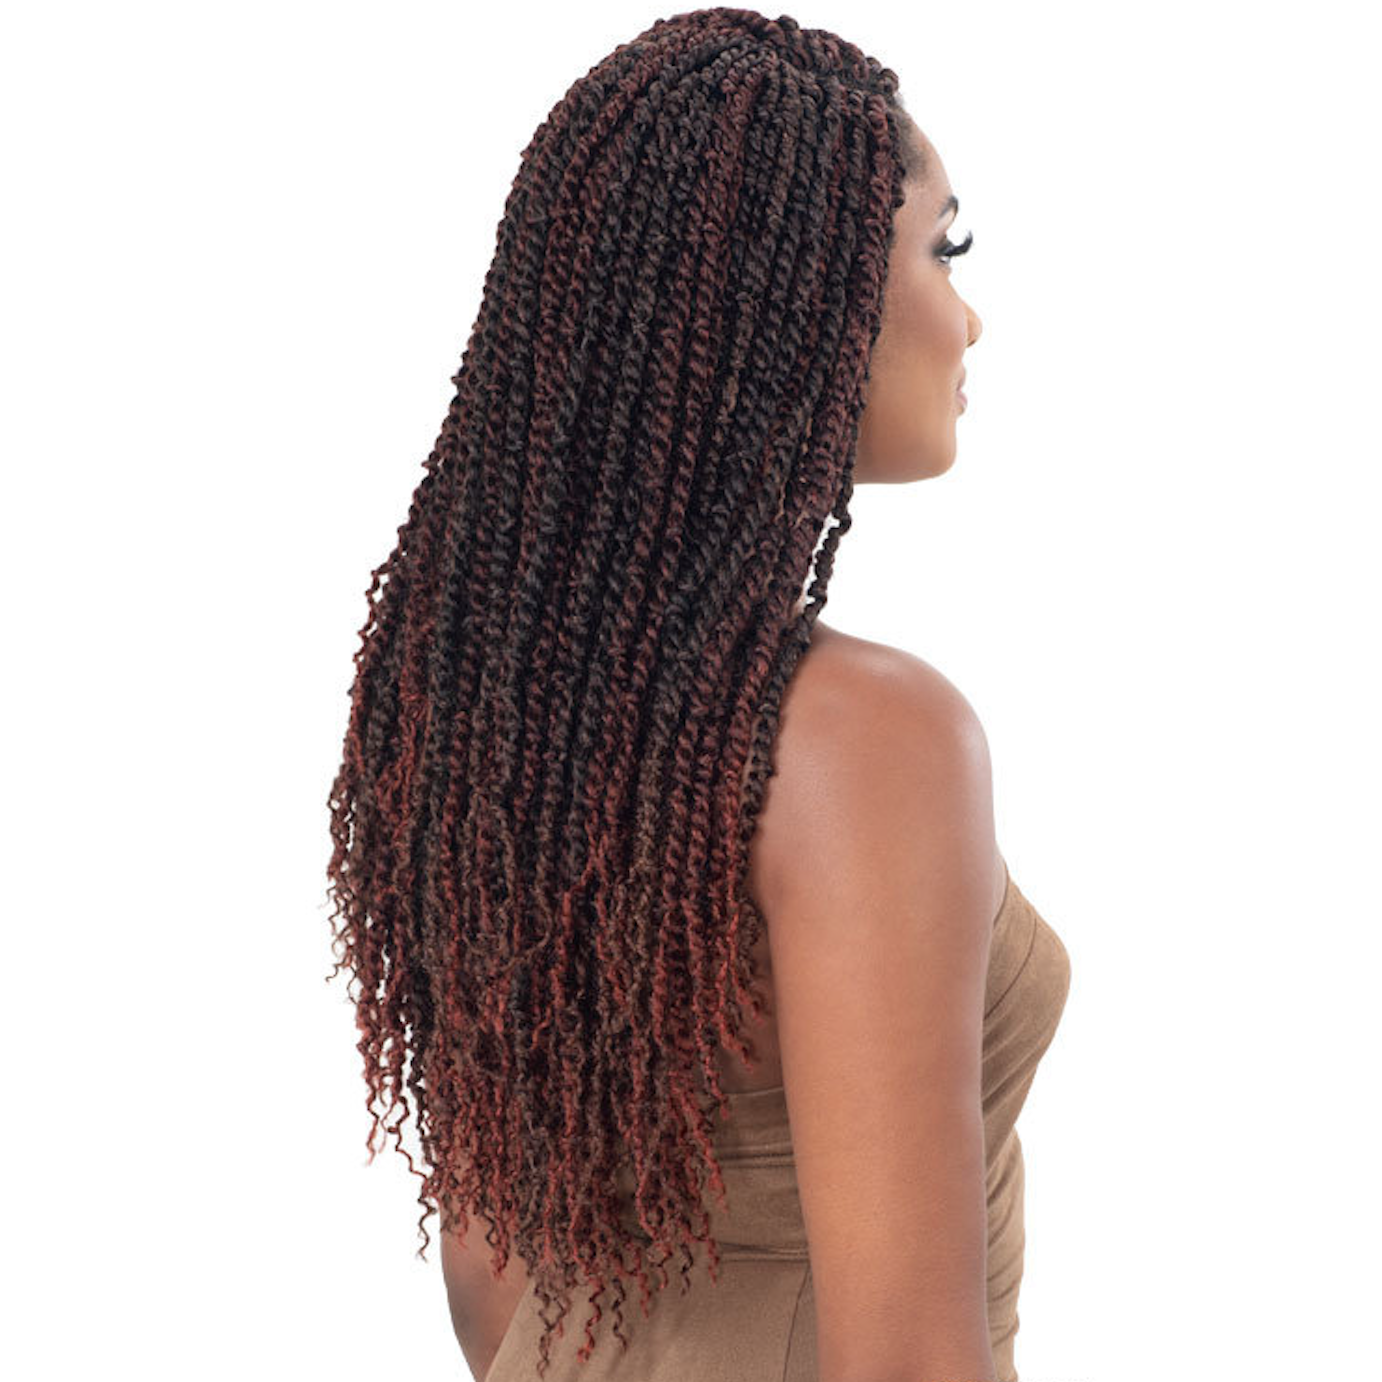 Mayde Beauty Braid 2X Passion Twist 18" - VIP Extensions